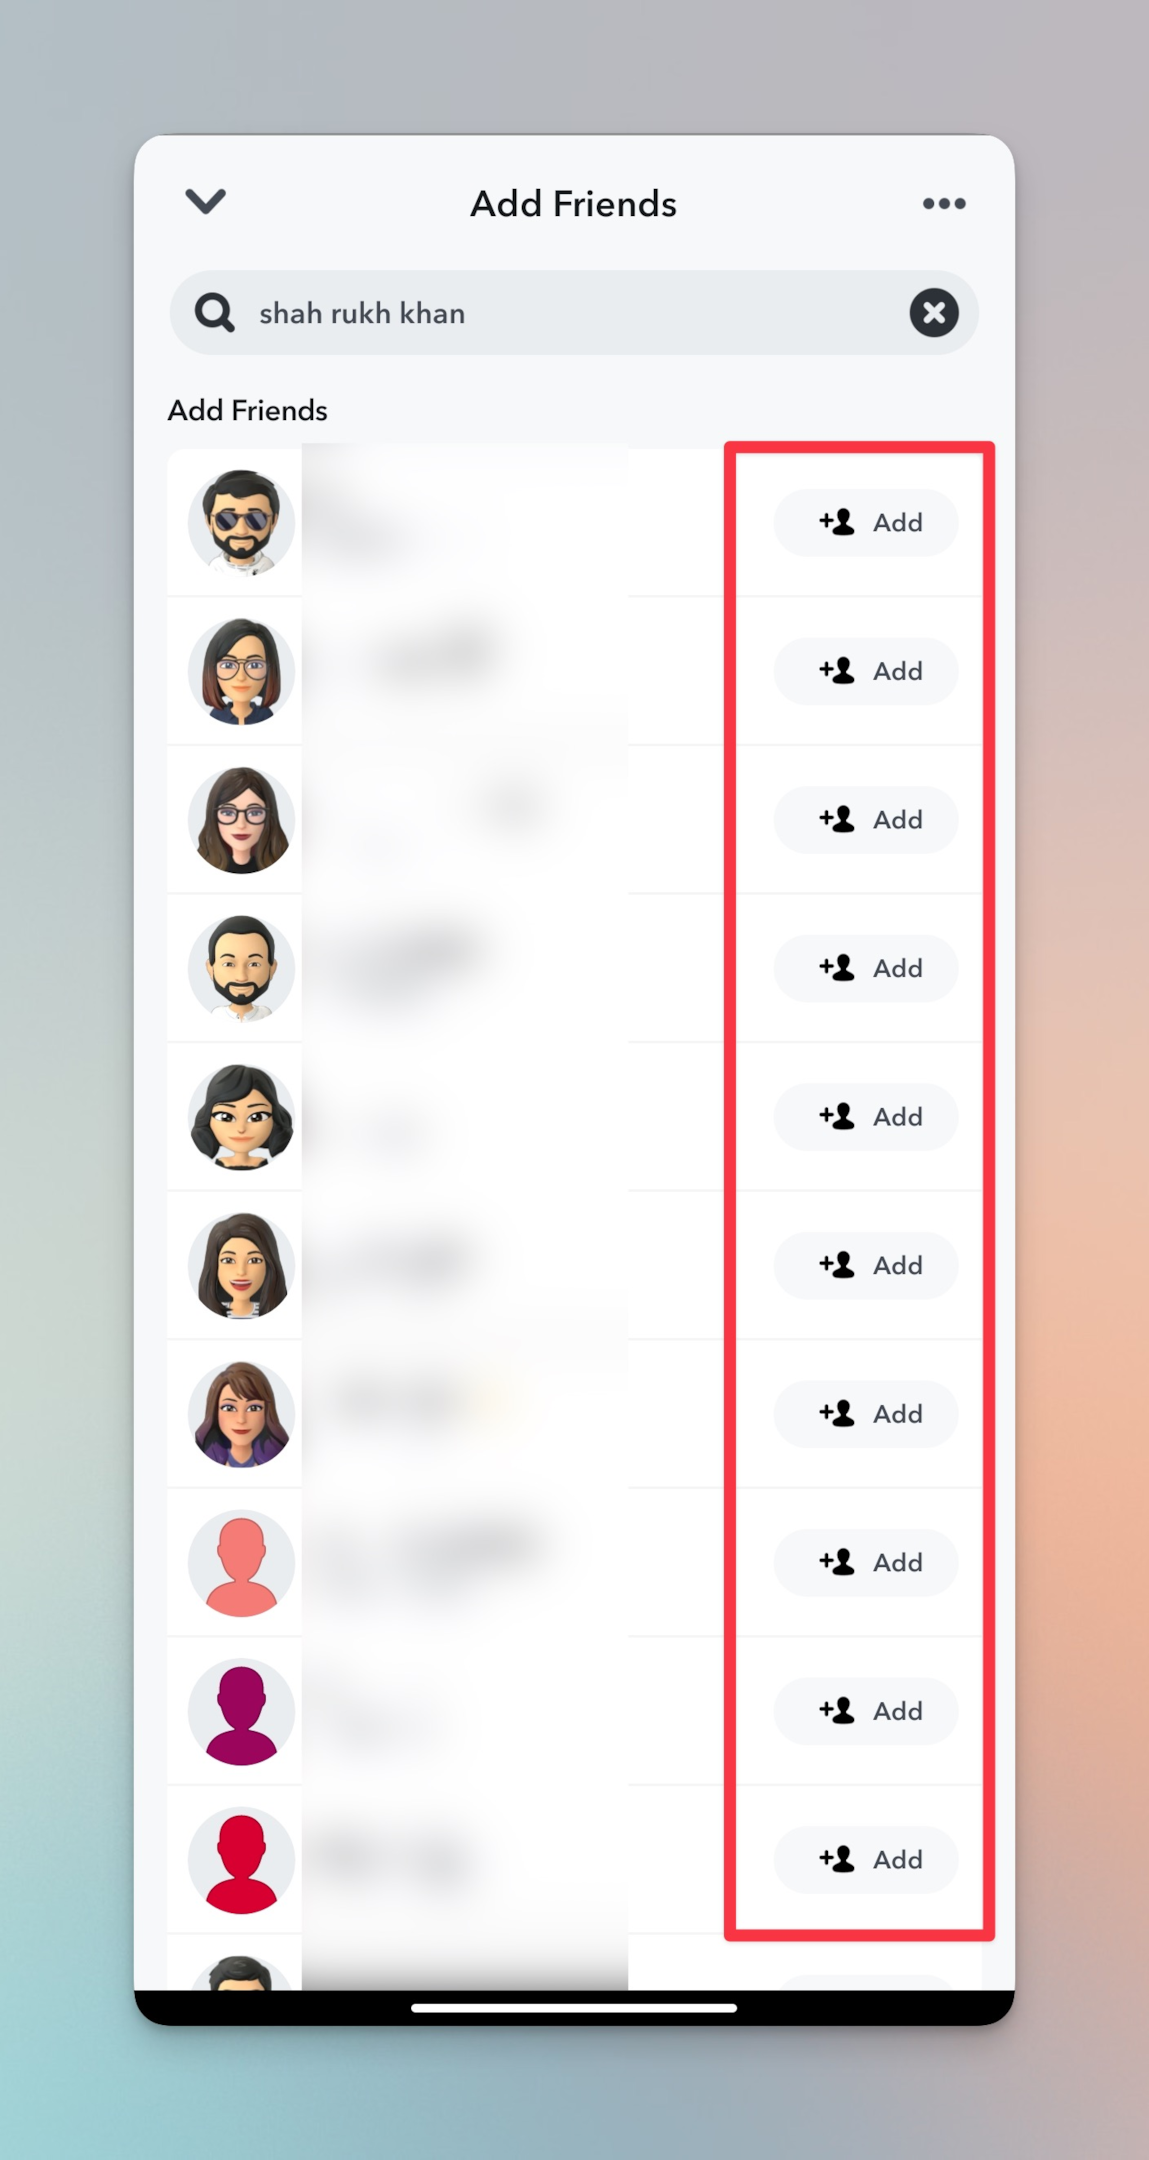 Remote.tools showing the search results of snapchat profile to add people from that list as friends